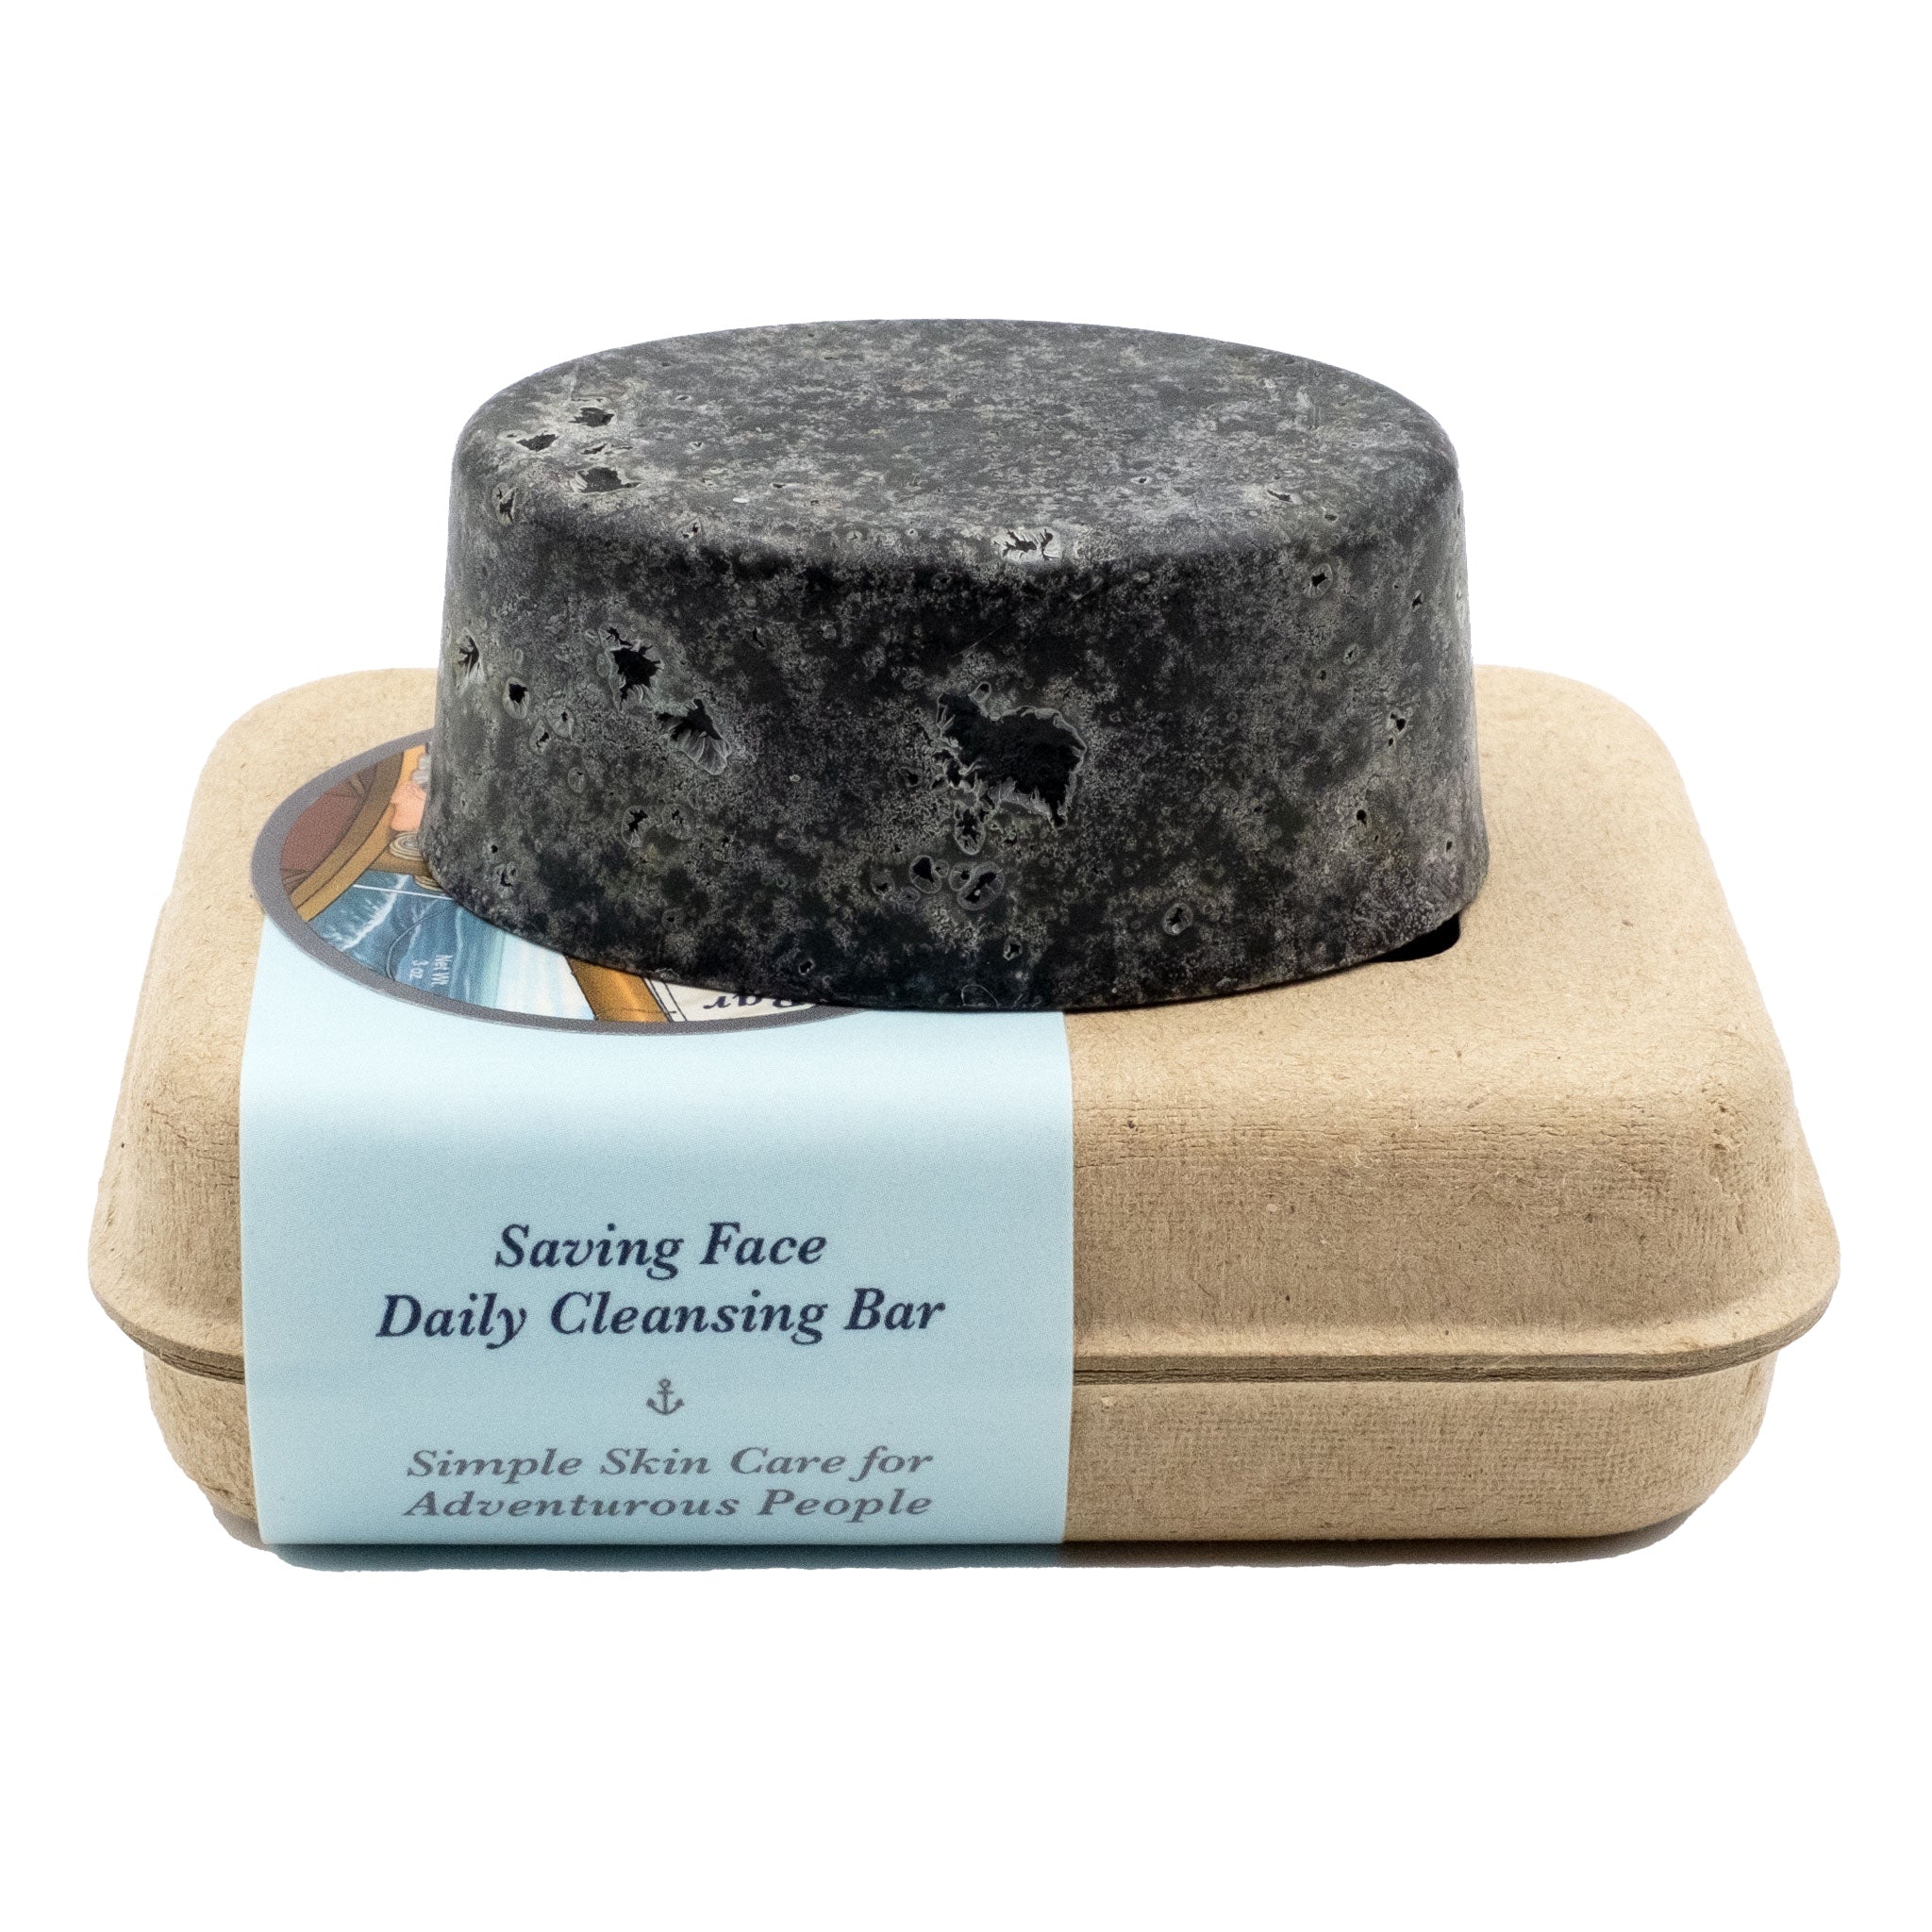 Handcrafted Organic Anti-Acne & Sensitive Skin Facial Charcoal Bar Soap Sitting on top of a box